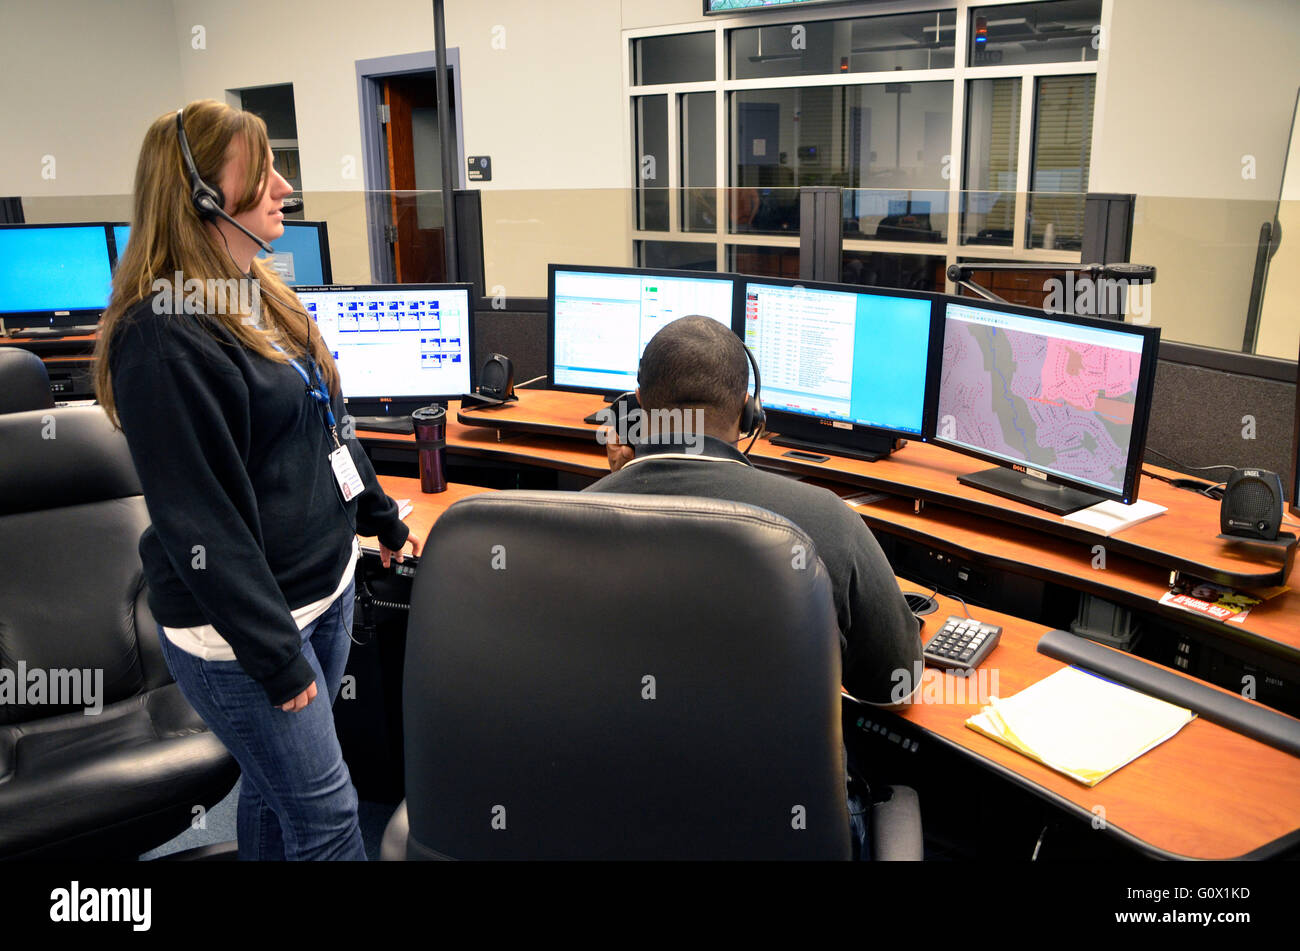 A Prince George's County  fire  department dispatcher(white female)is training a rookie dispatcher (black male) in Bowie, Maryla Stock Photo